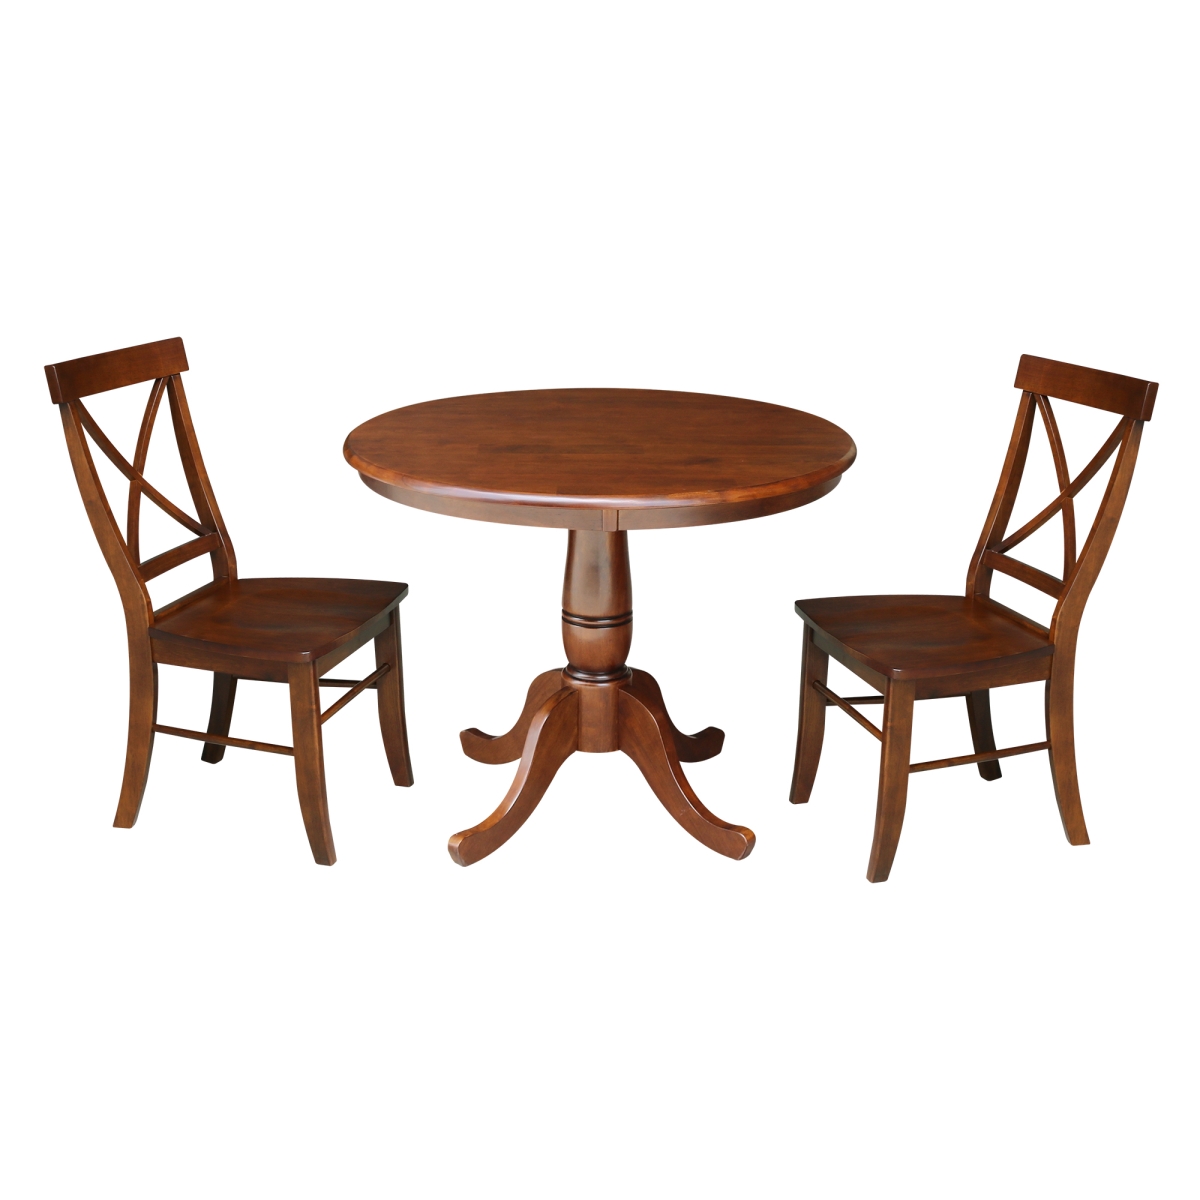 K581-36rt-c613-2 36 In. Round Top Pedestal Table With 2 Chairs, Espresso - 3 Piece